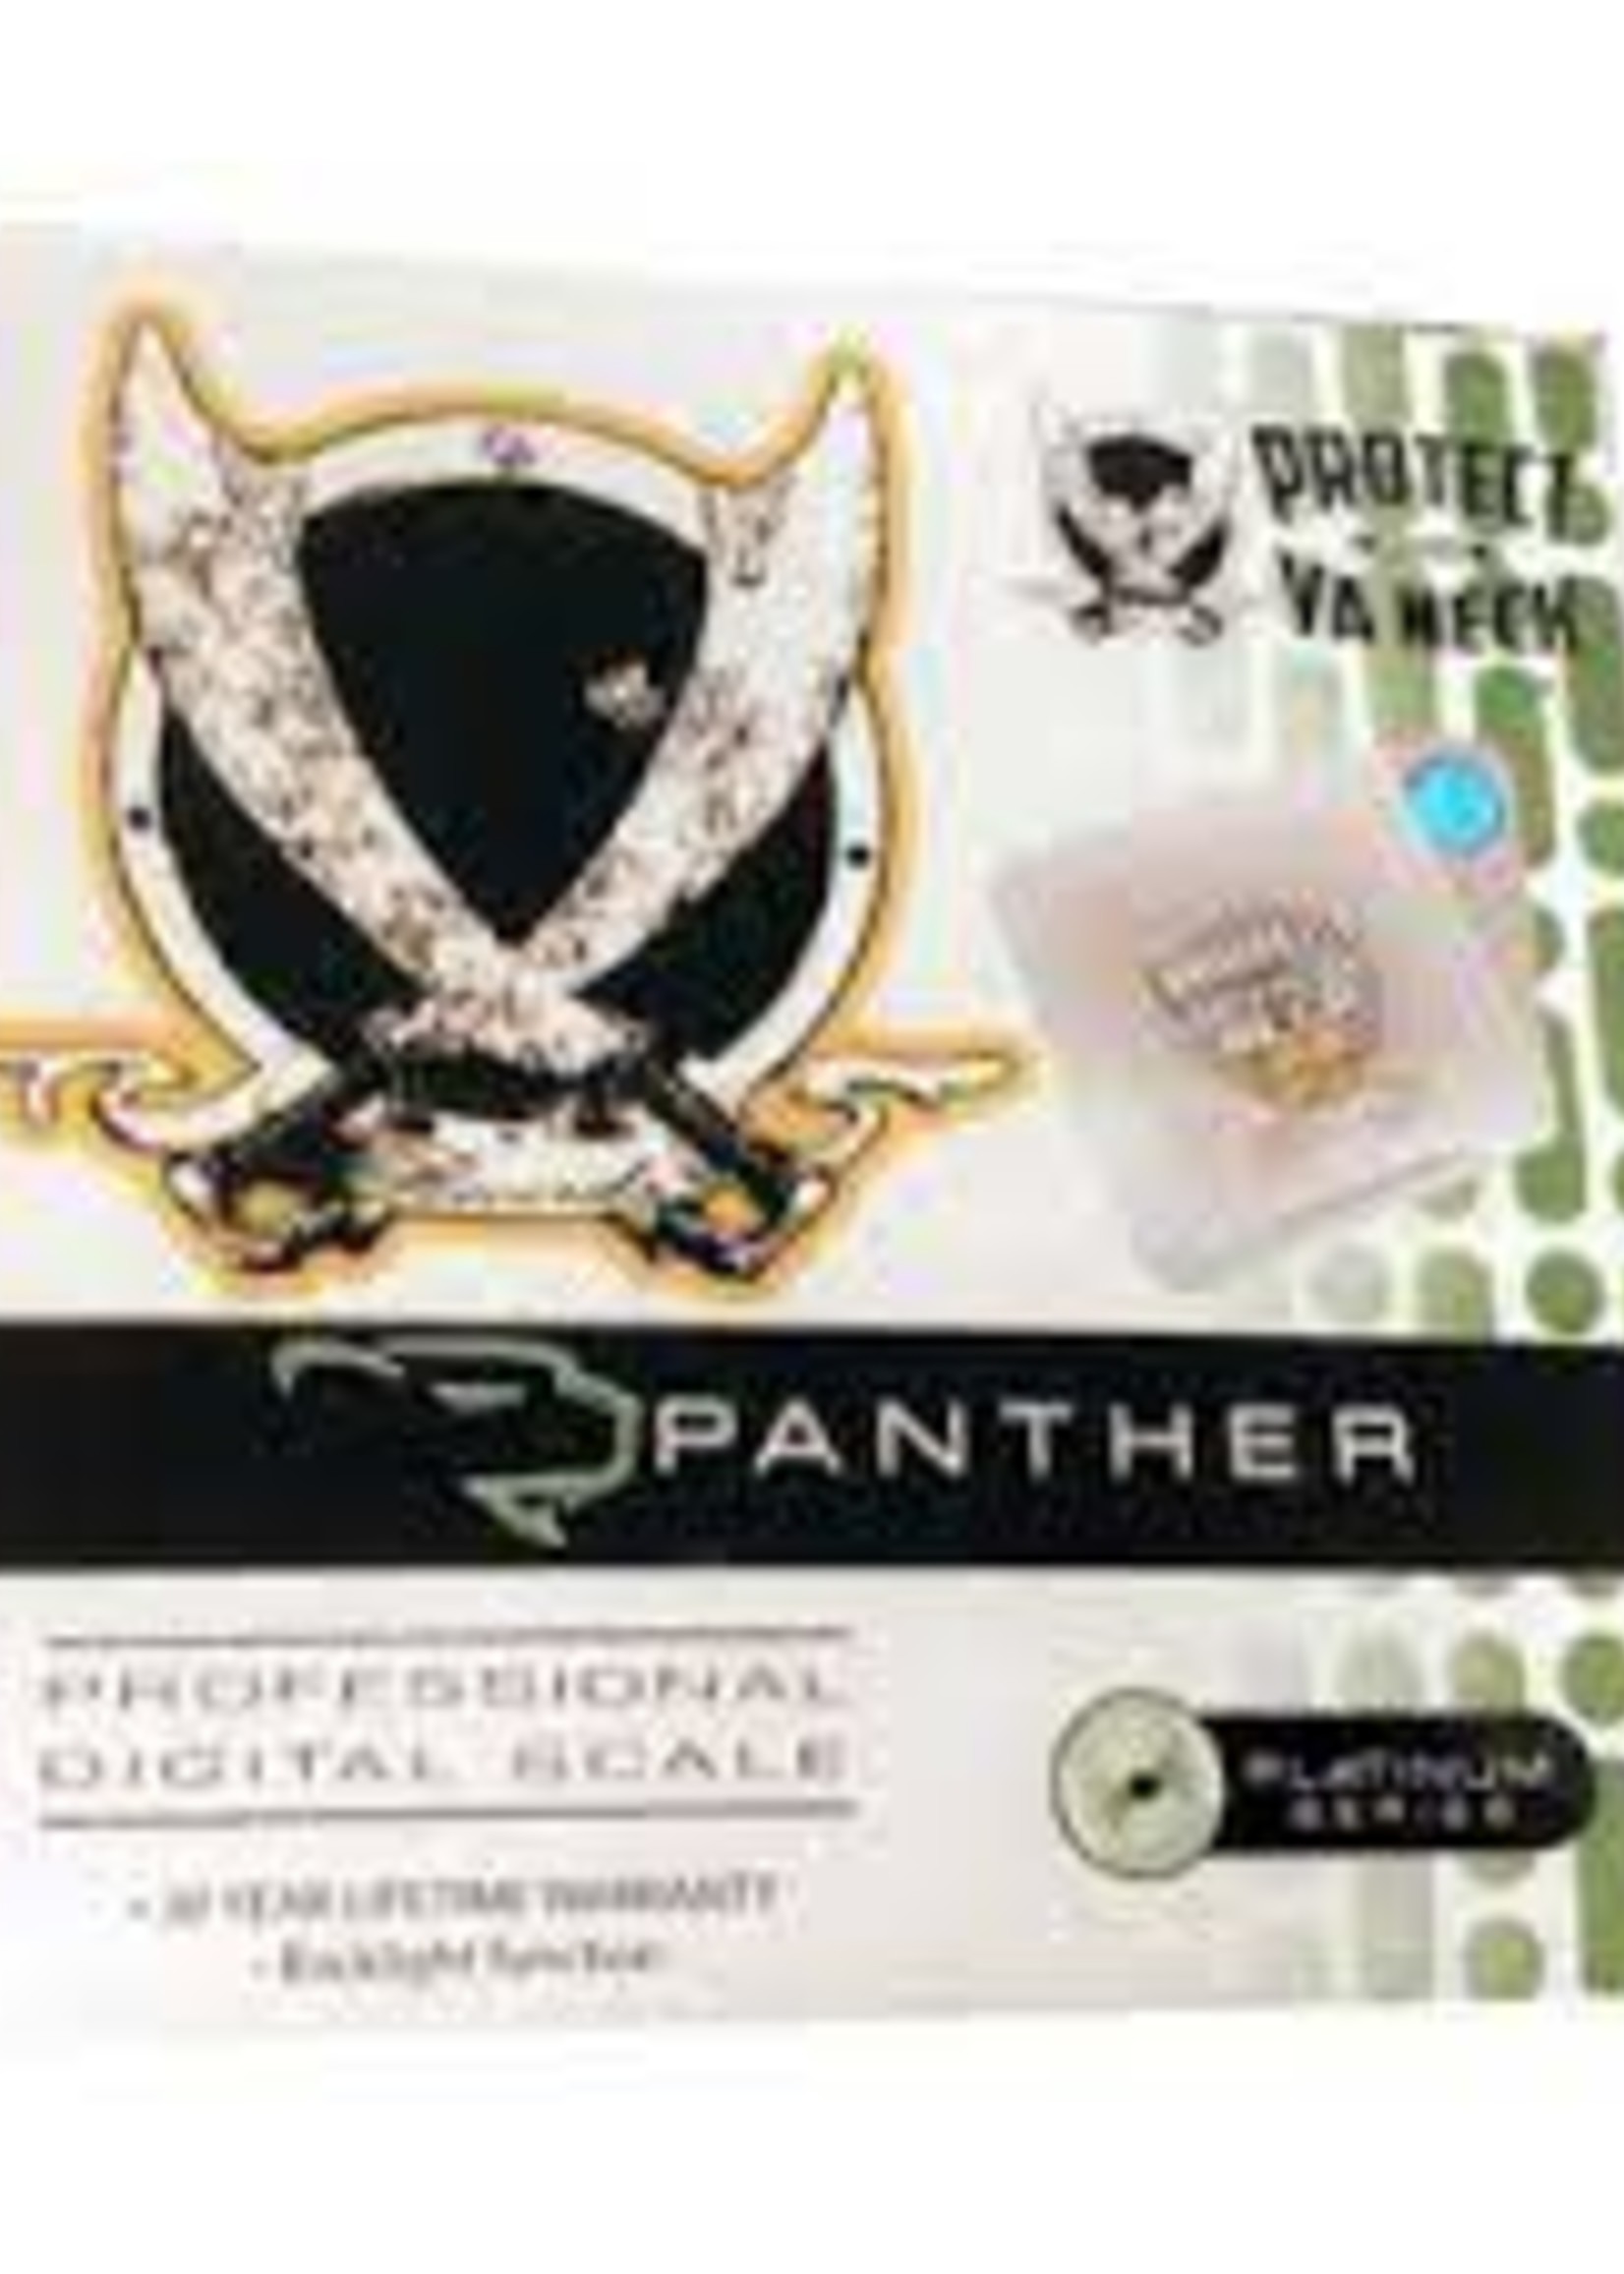 Scale: PYN Panther - 50g x 0.01g